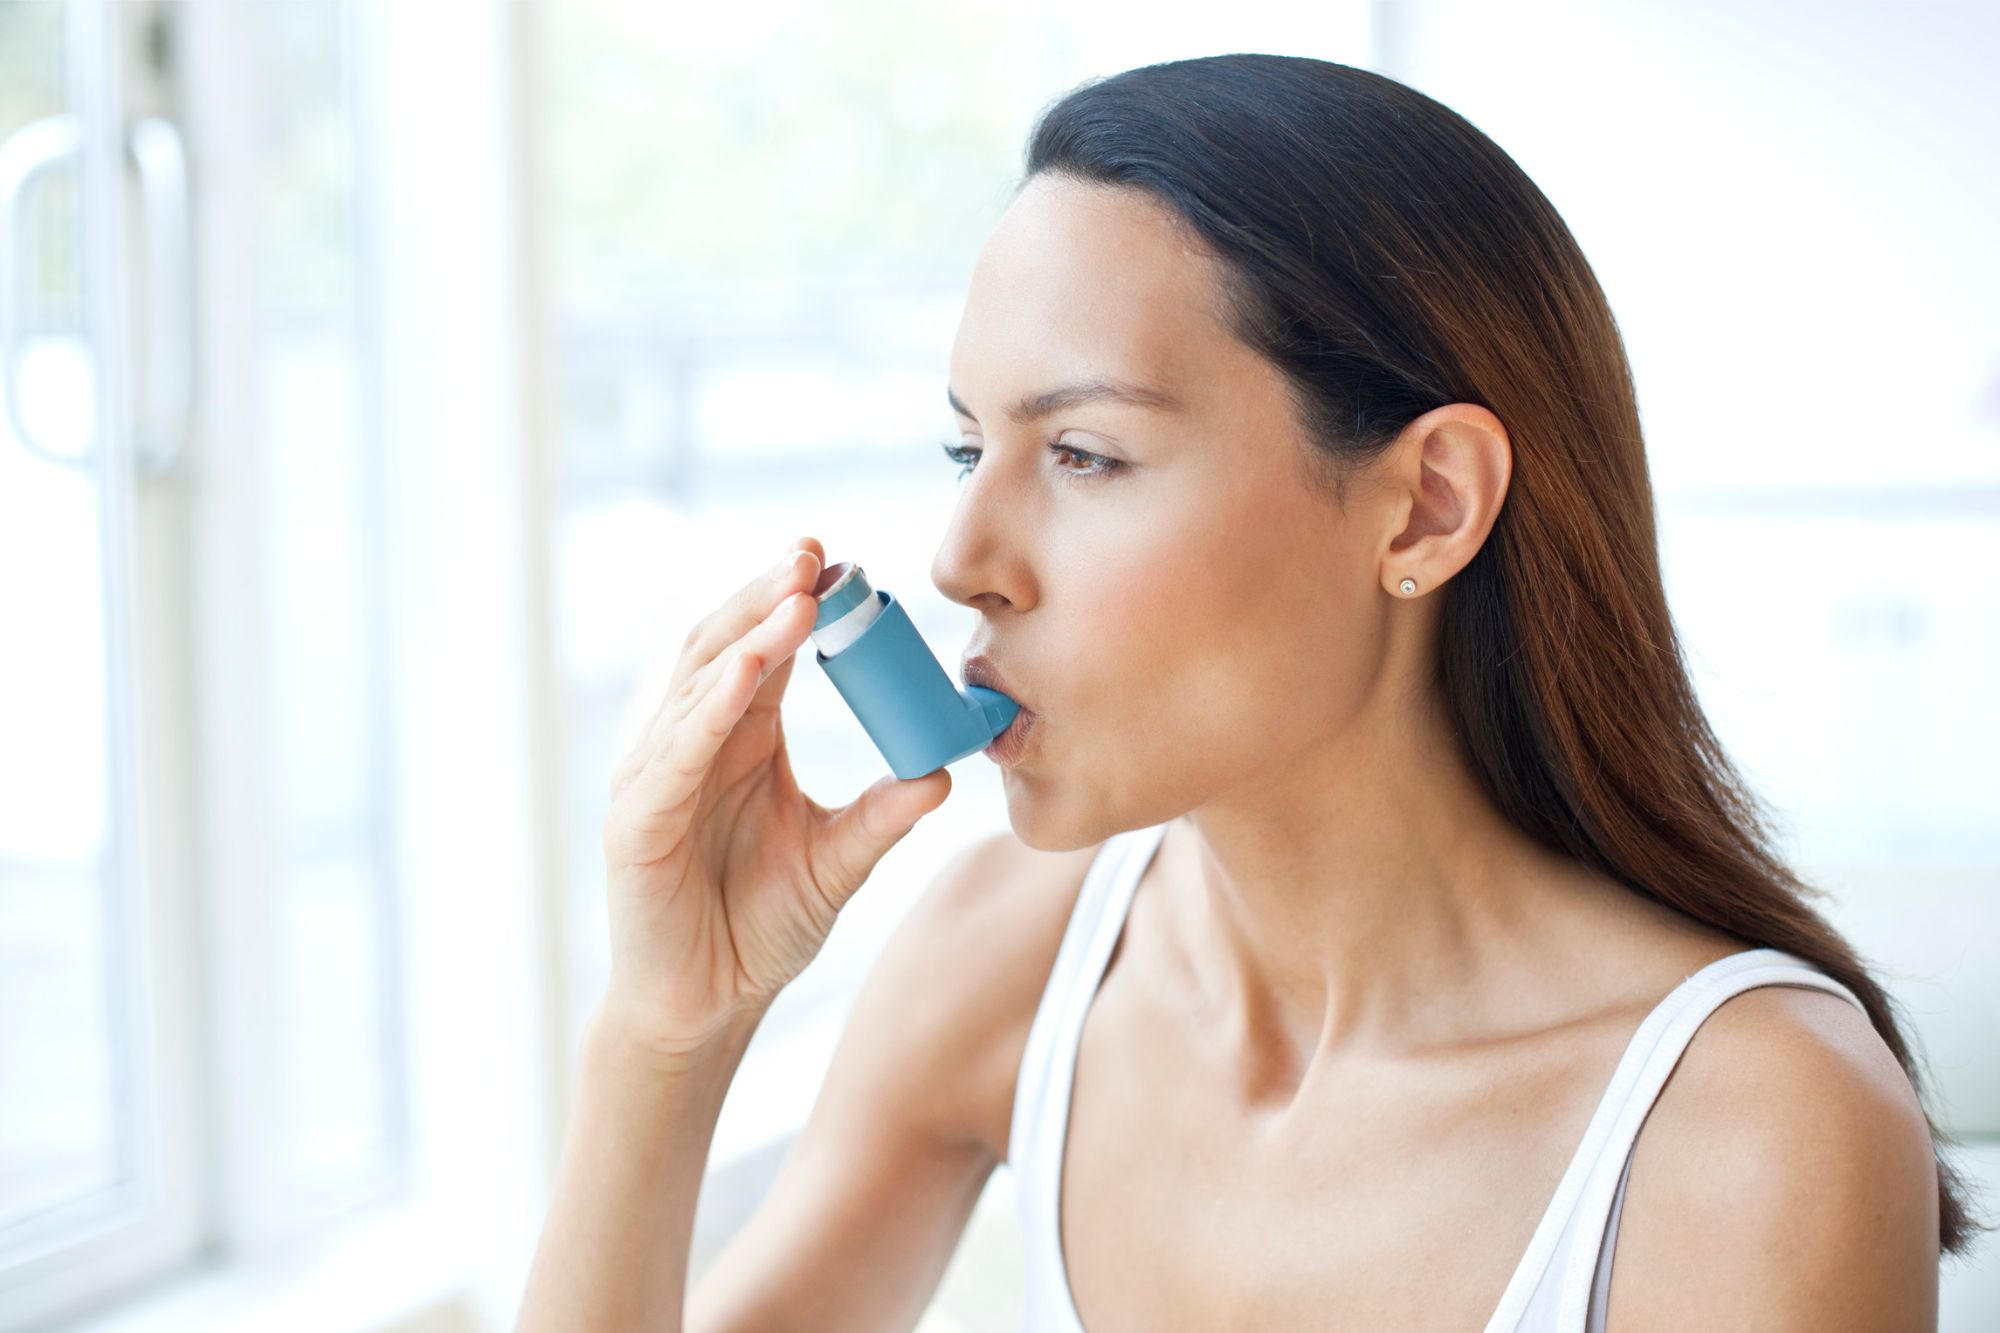 Scientists Identify a New Asthma Trigger: Sexual Activity